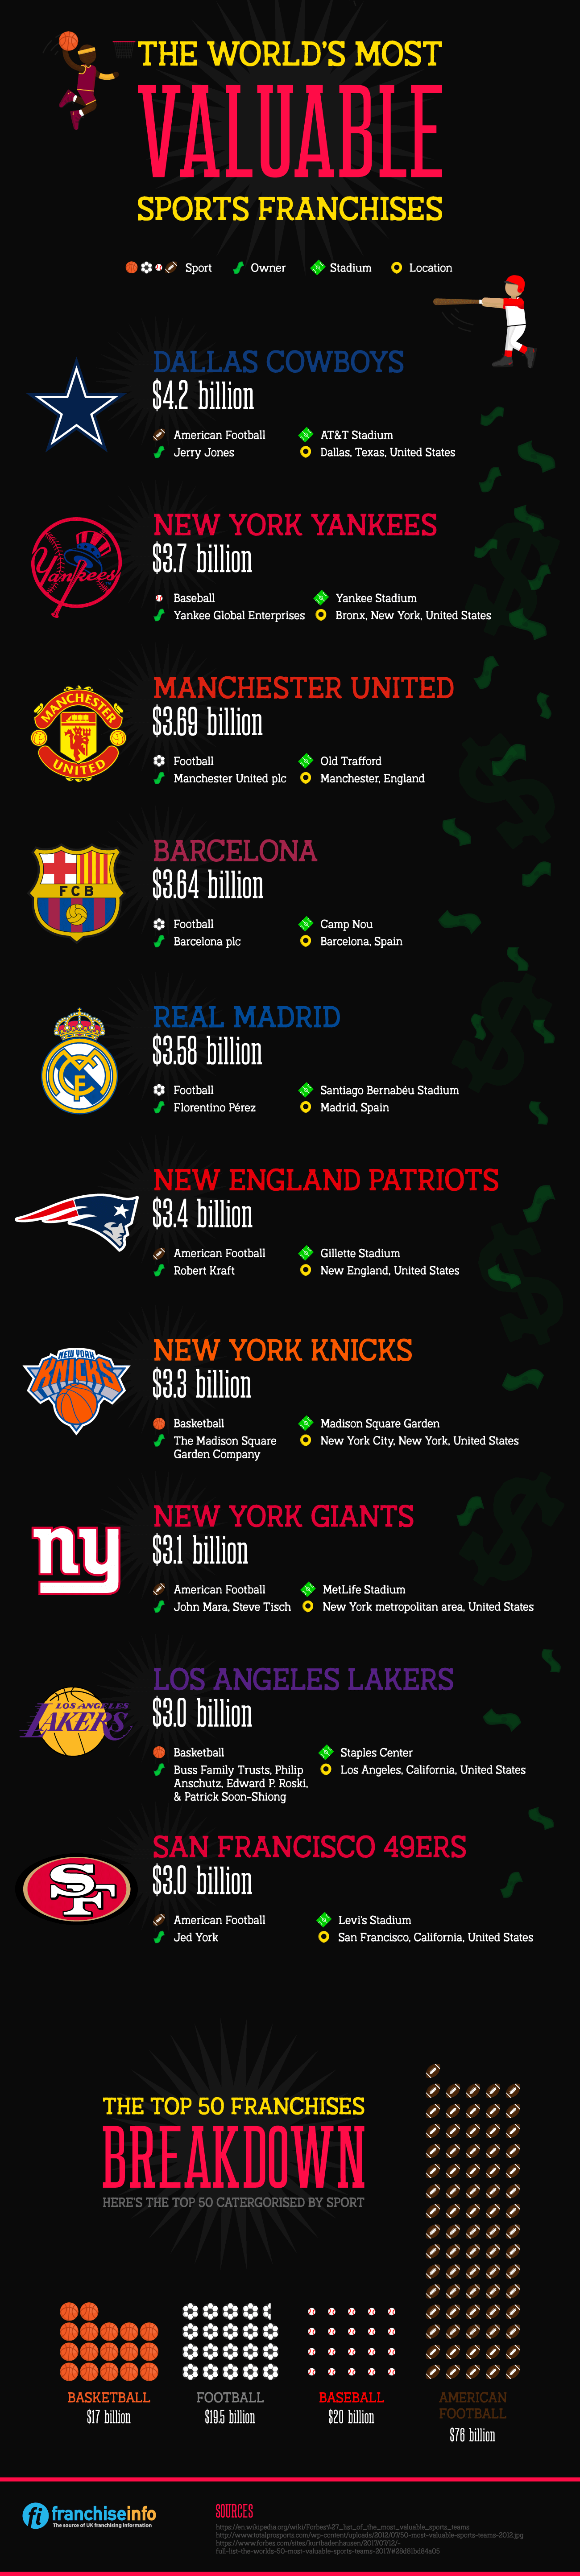 World's Most Valuable Sports Franchises Infographic